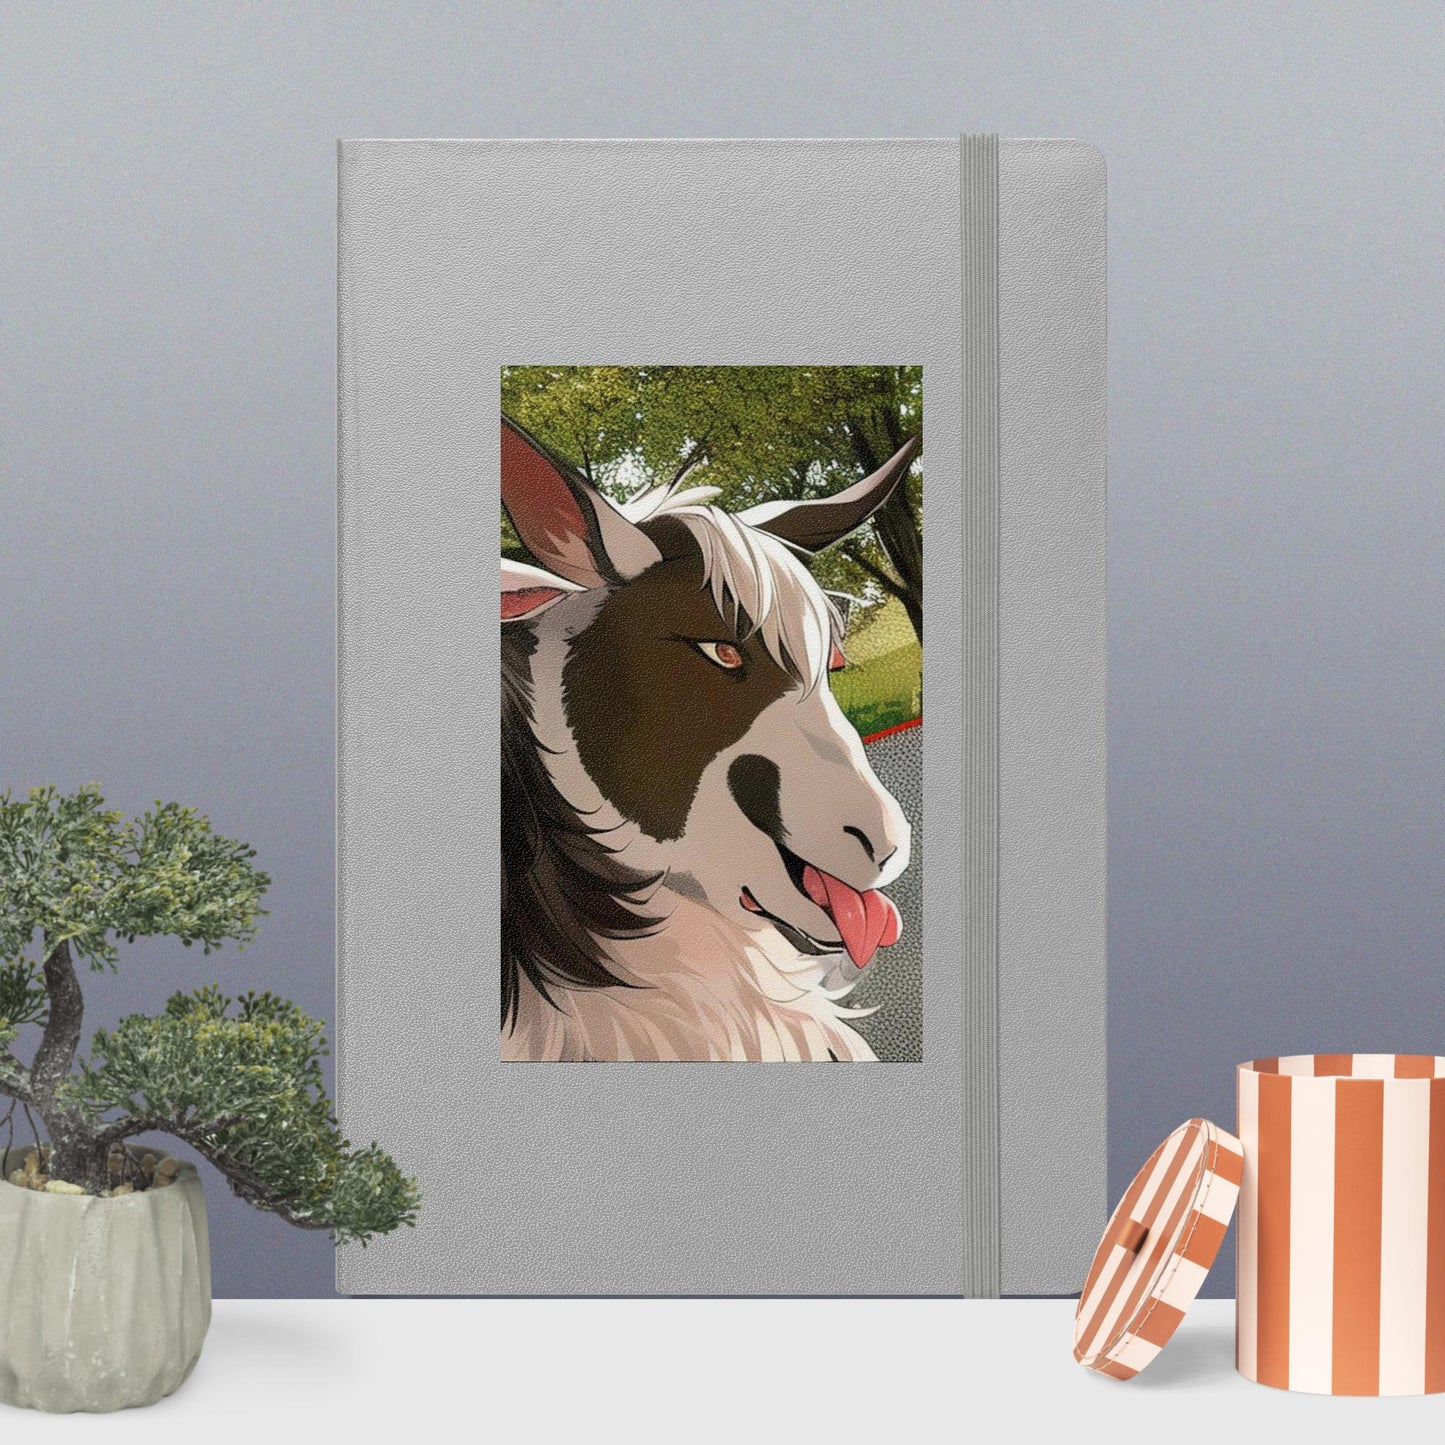 Hardcover bound notebook with goat cartoon with tongue out